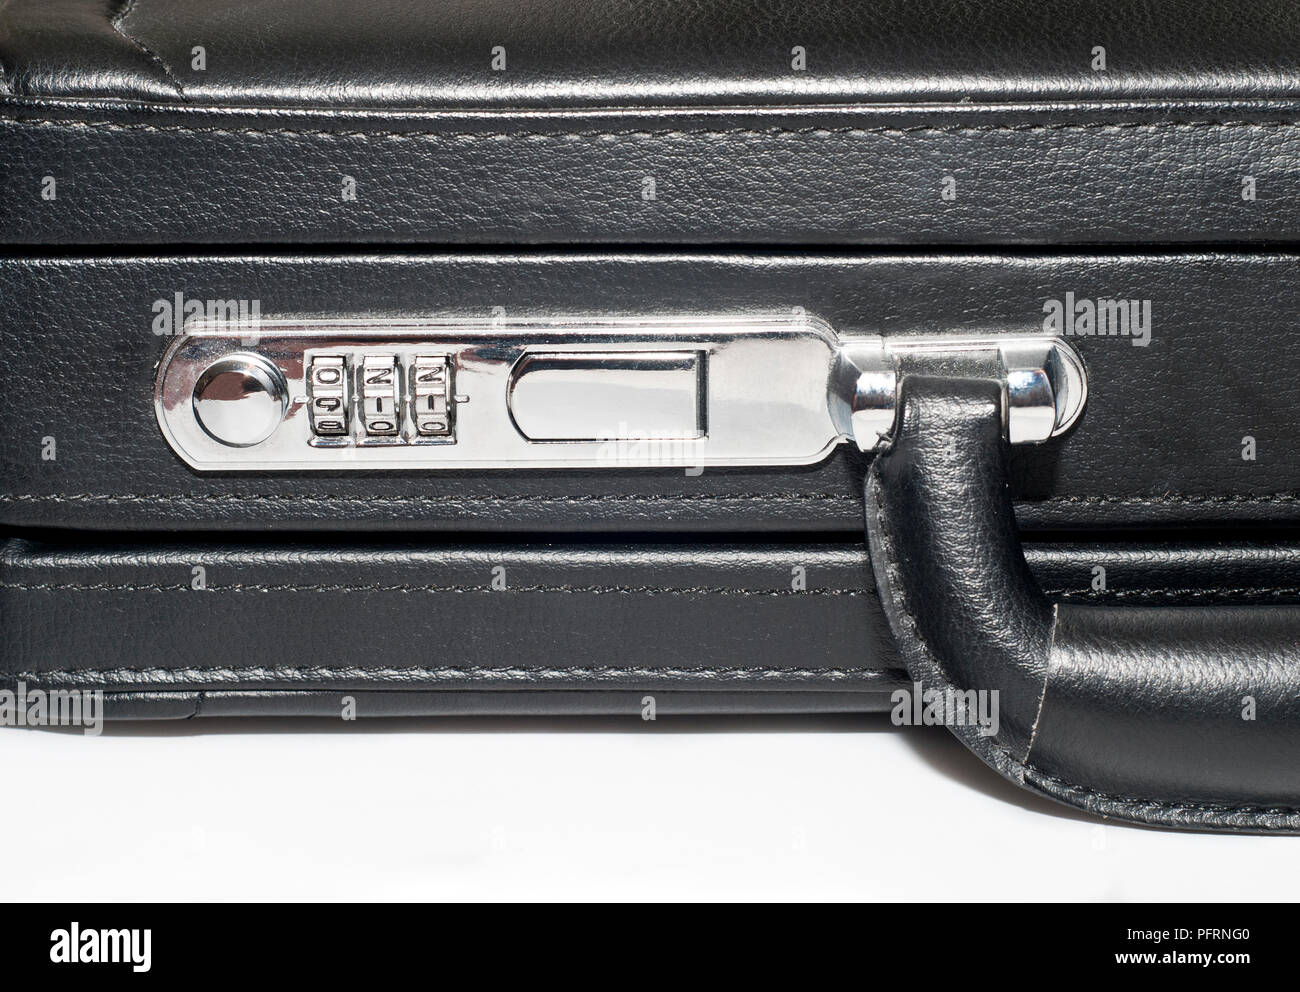 Black briefcase with 911 combination on the lock, close-up Stock Photo